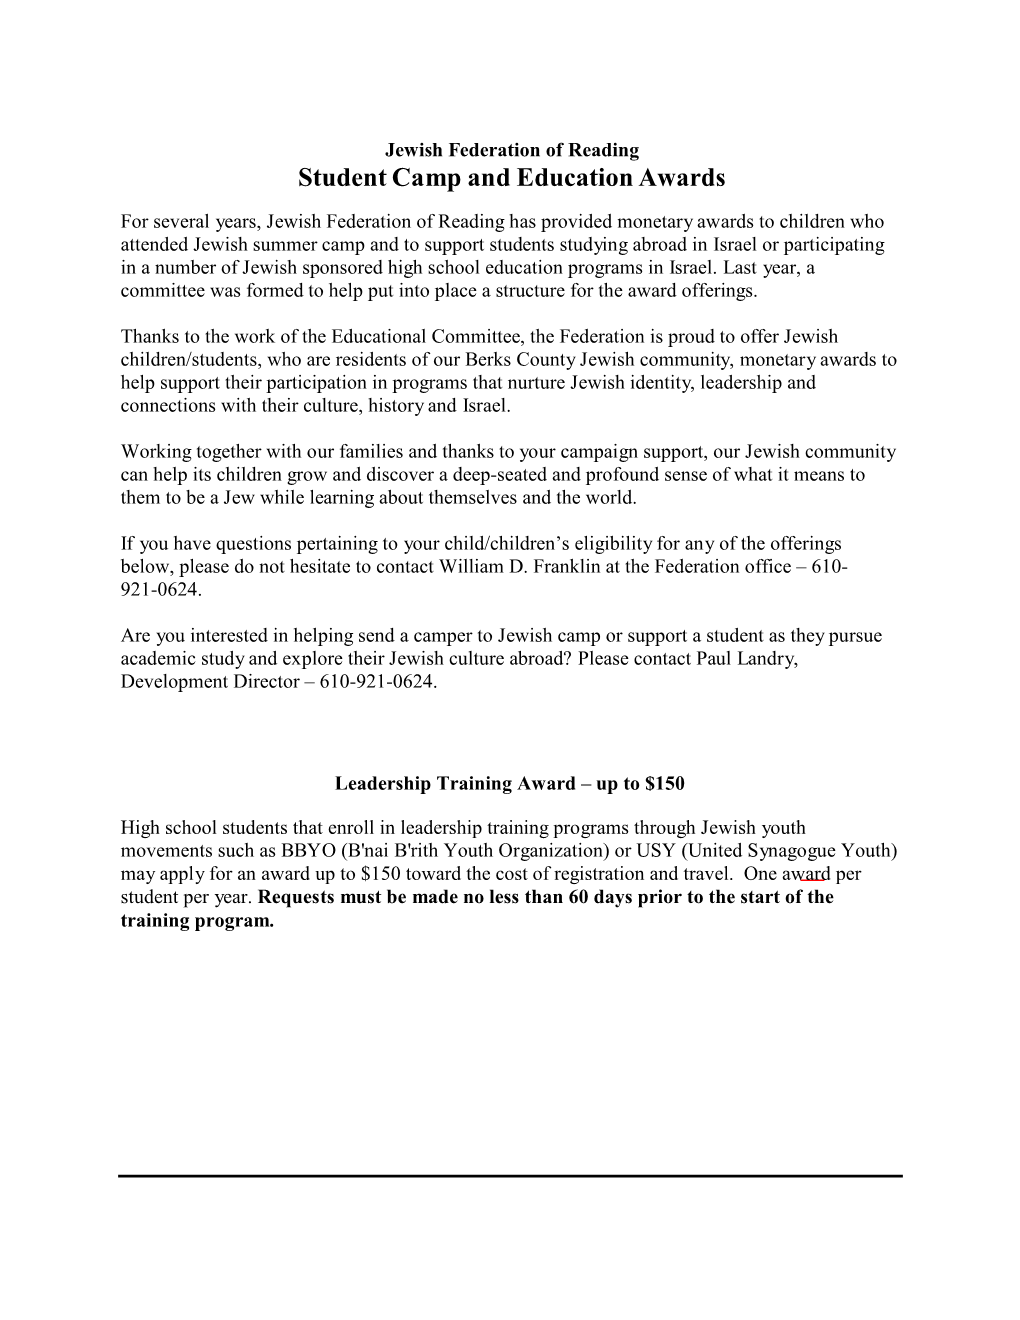 Jewish Federation of Reading Student Camp and Education Awards